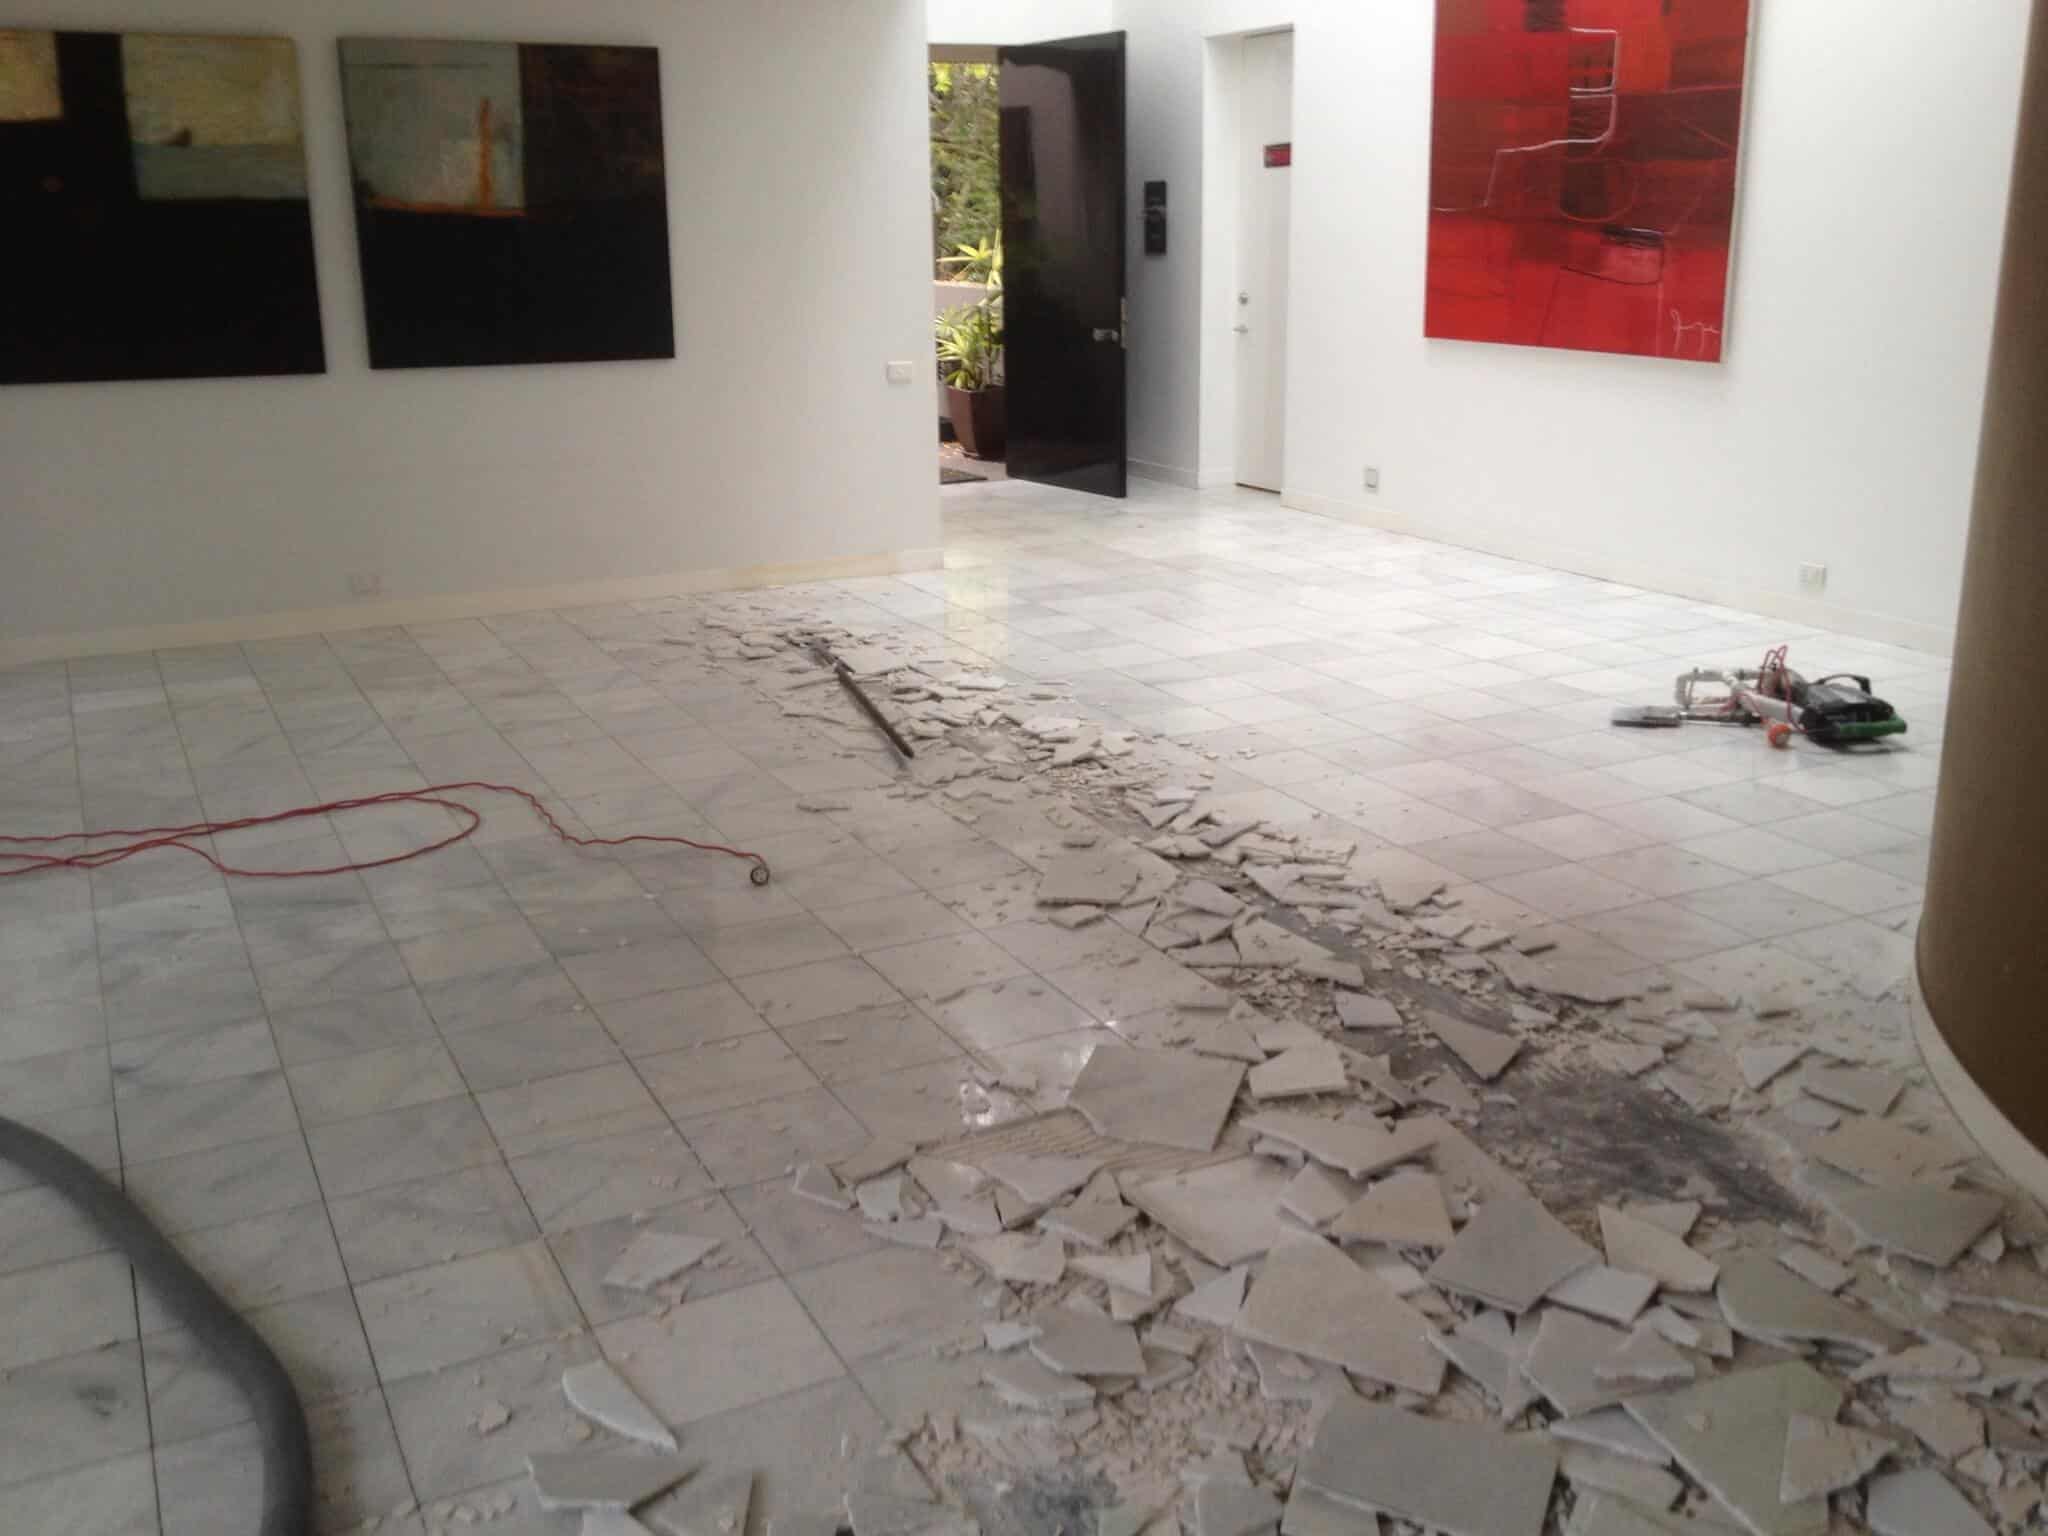 During the process, of tile removal, large vacuums are used to extract dust